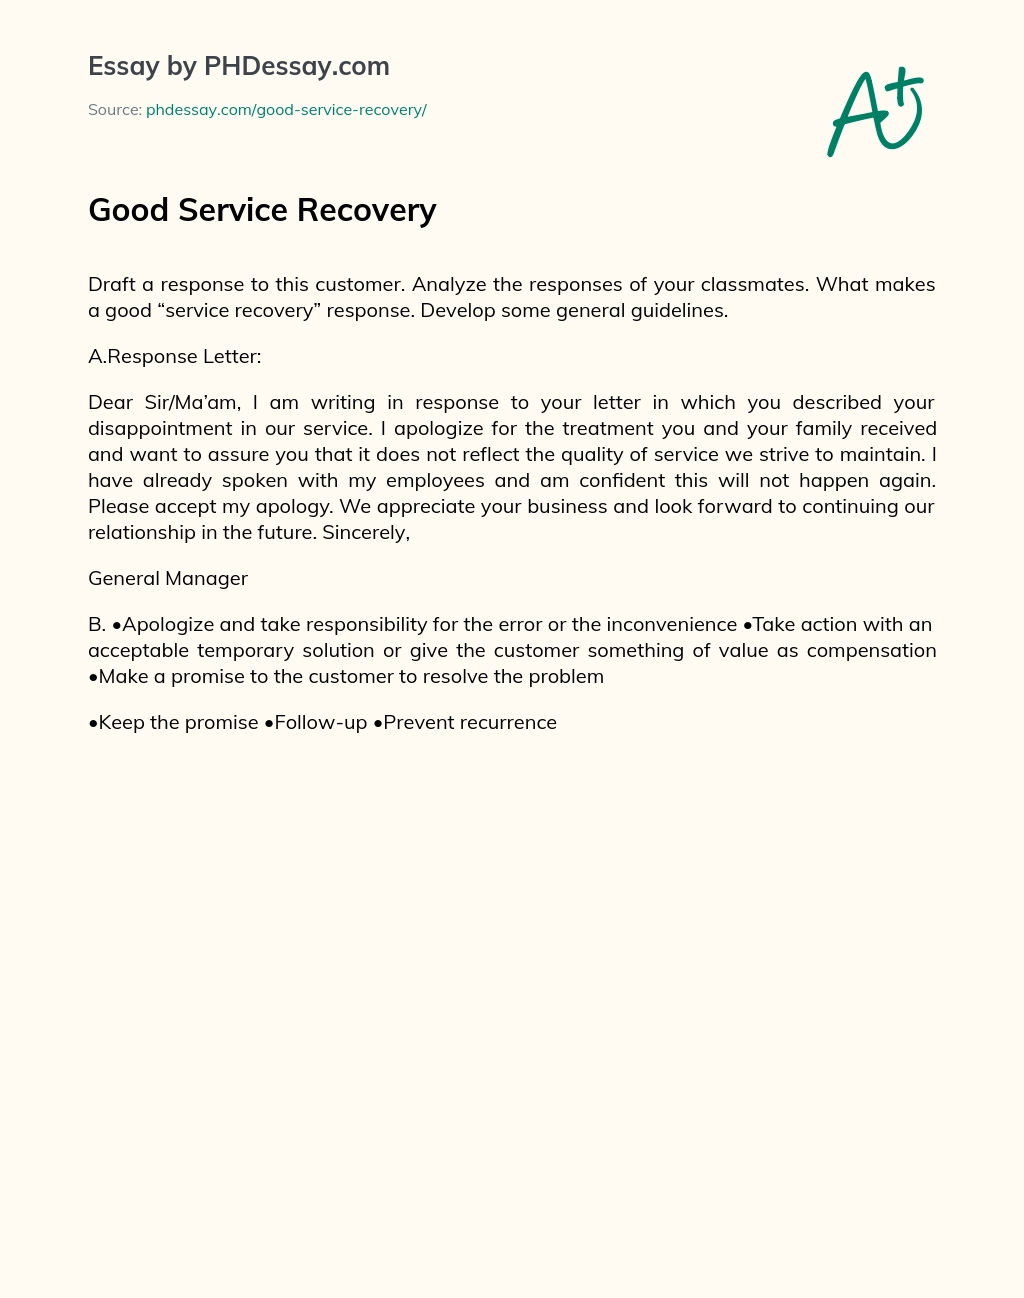 Good Service Recovery essay